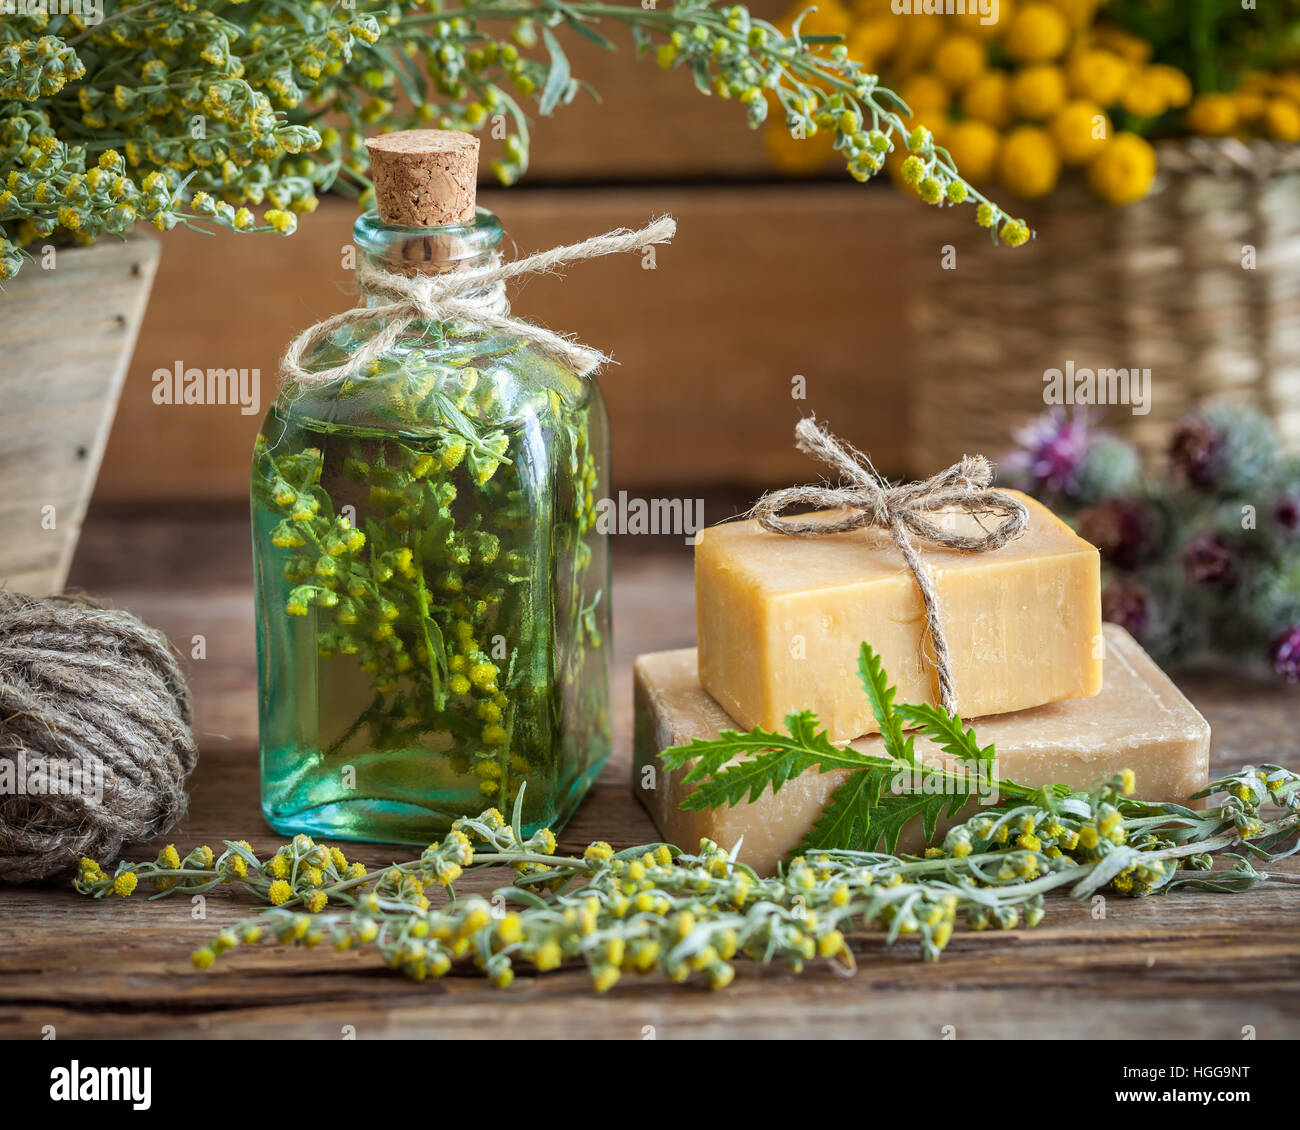 Bottle of tarragon tincture, healthy herbs and bars of homemade soap. Herbal medicine and natural care products. Stock Photo